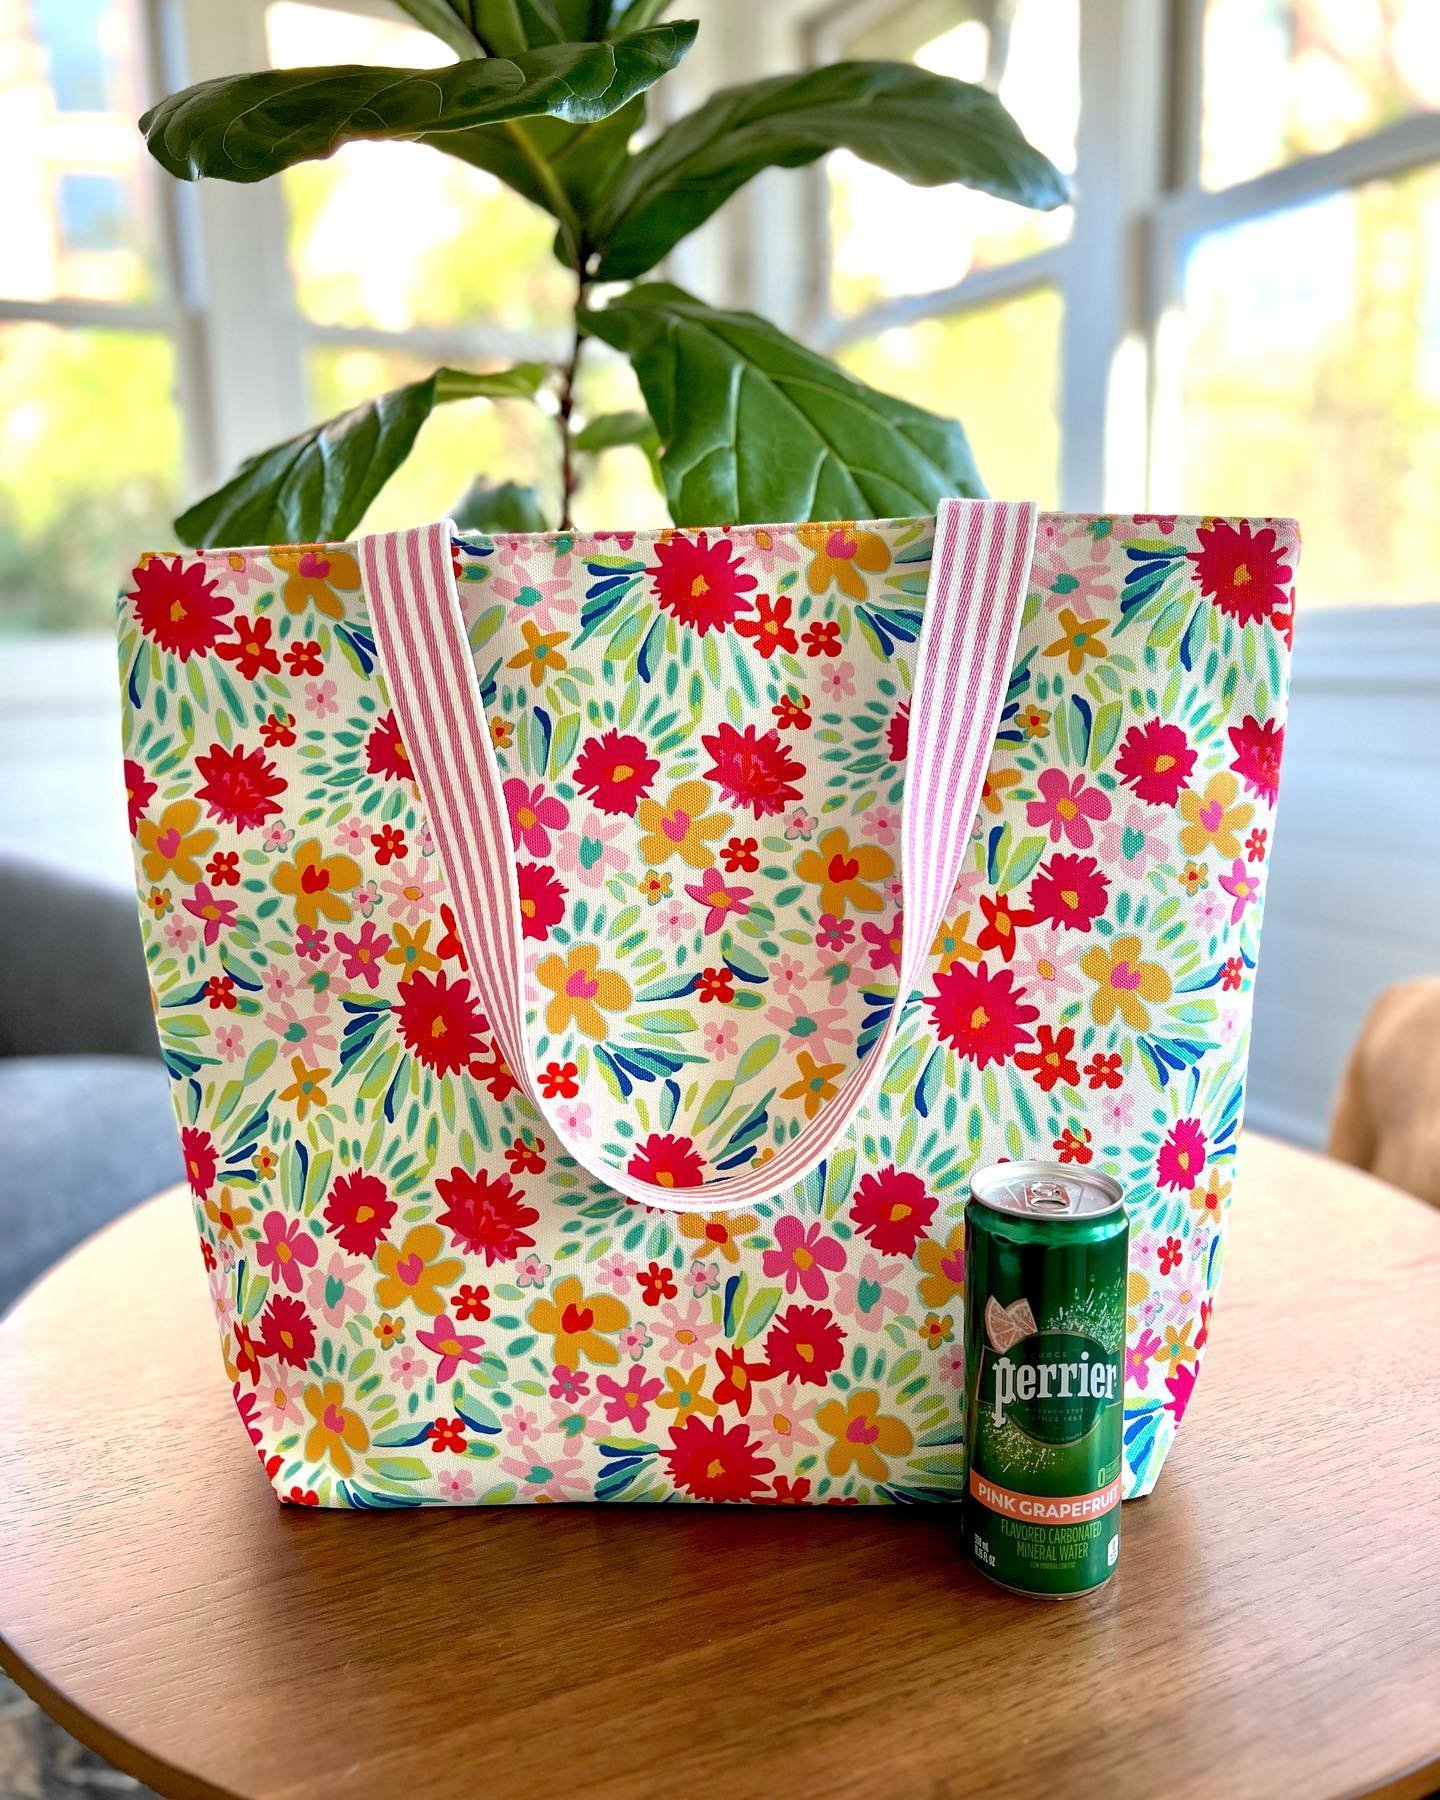 Calling all last minute shoppers! 🙋🏻&zwj;♀️
Starting today we have a fabulous gift with purchase 🚨 
When you spend $100+, you&rsquo;ll receive one of these darling zippered totes as our free gift to you!
Gift it or keep for yourself, fill with flo